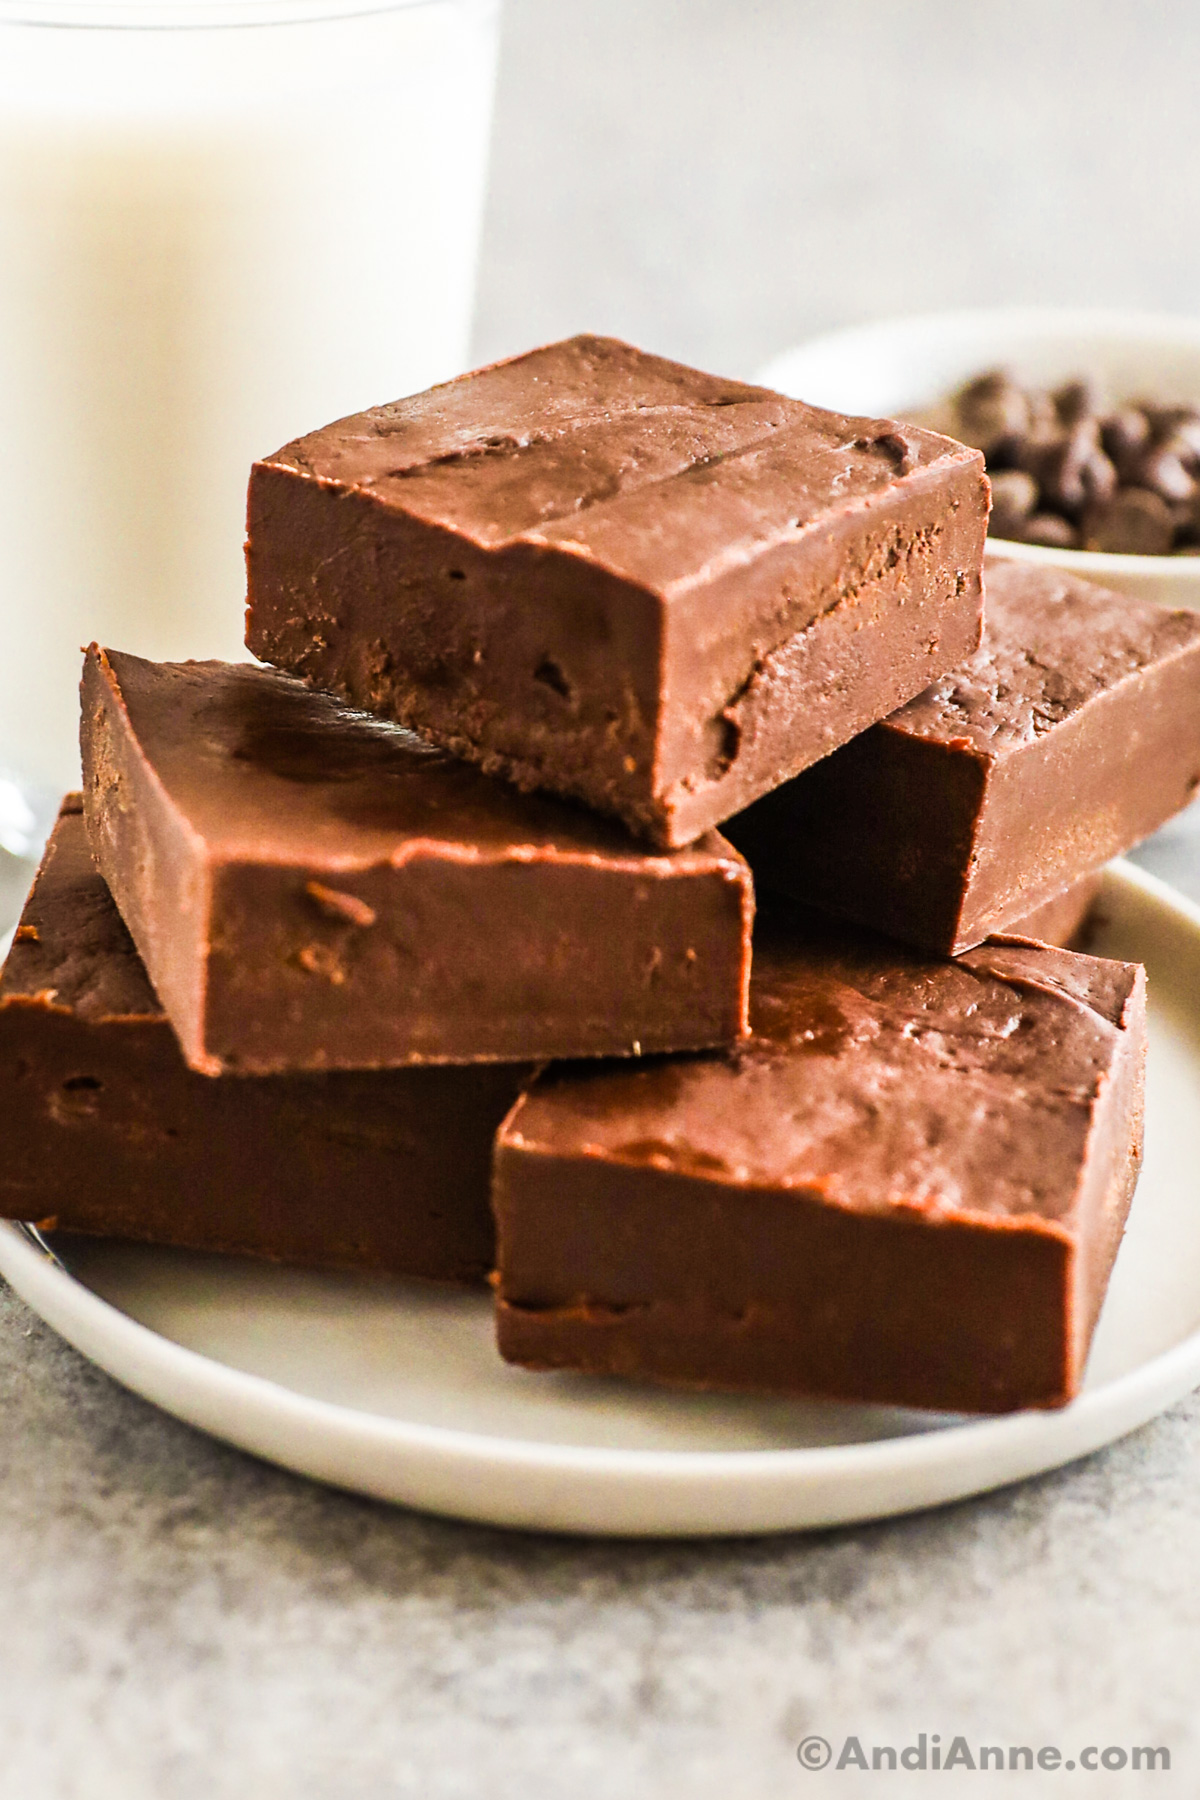 A stack of chocolate fudge squares on a plate.